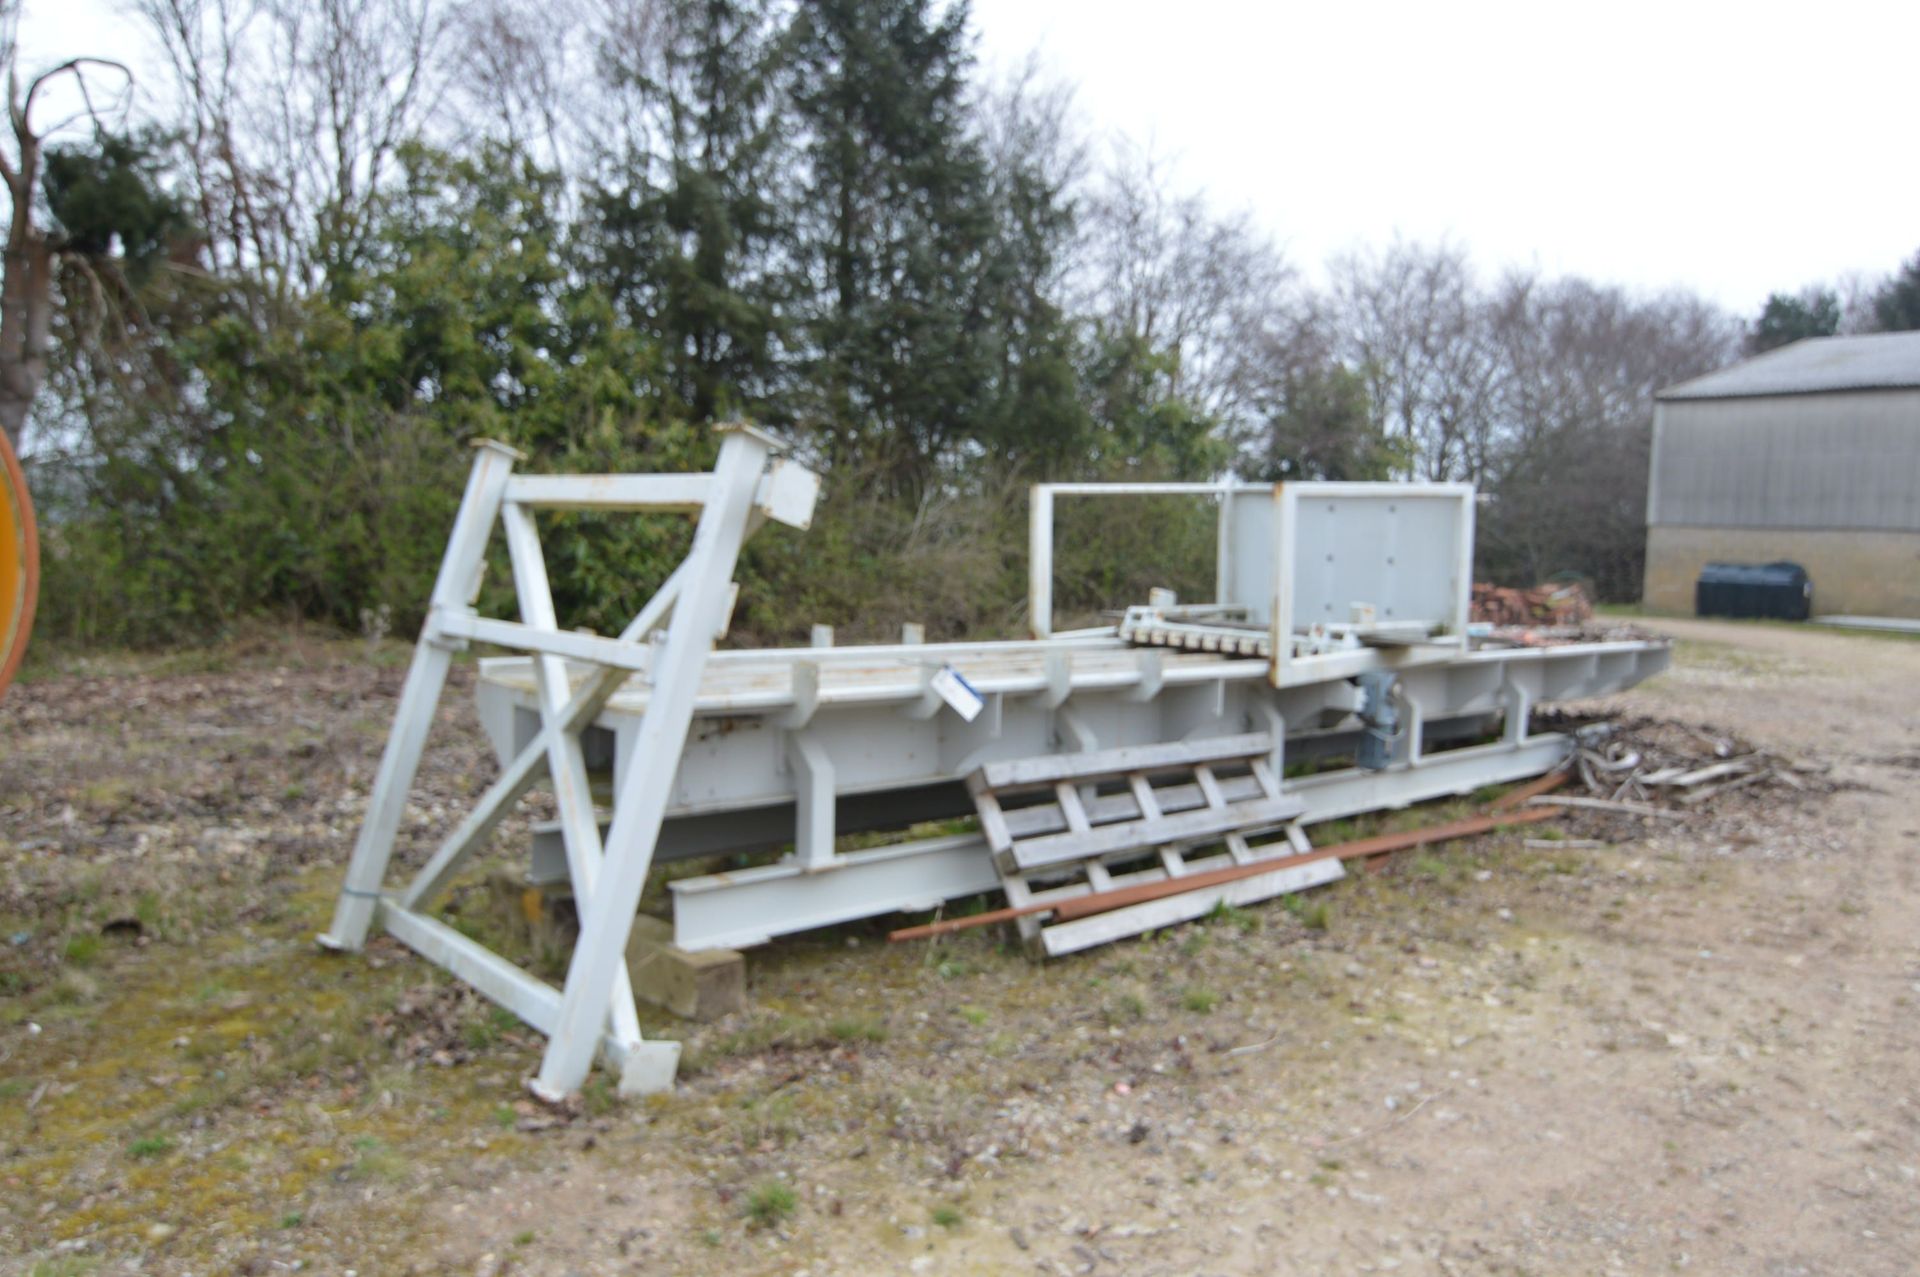 Passat STRAW BALE SHREDDER, with hopper, steel frame supports and conveyor feed unit (no chain), - Image 12 of 14